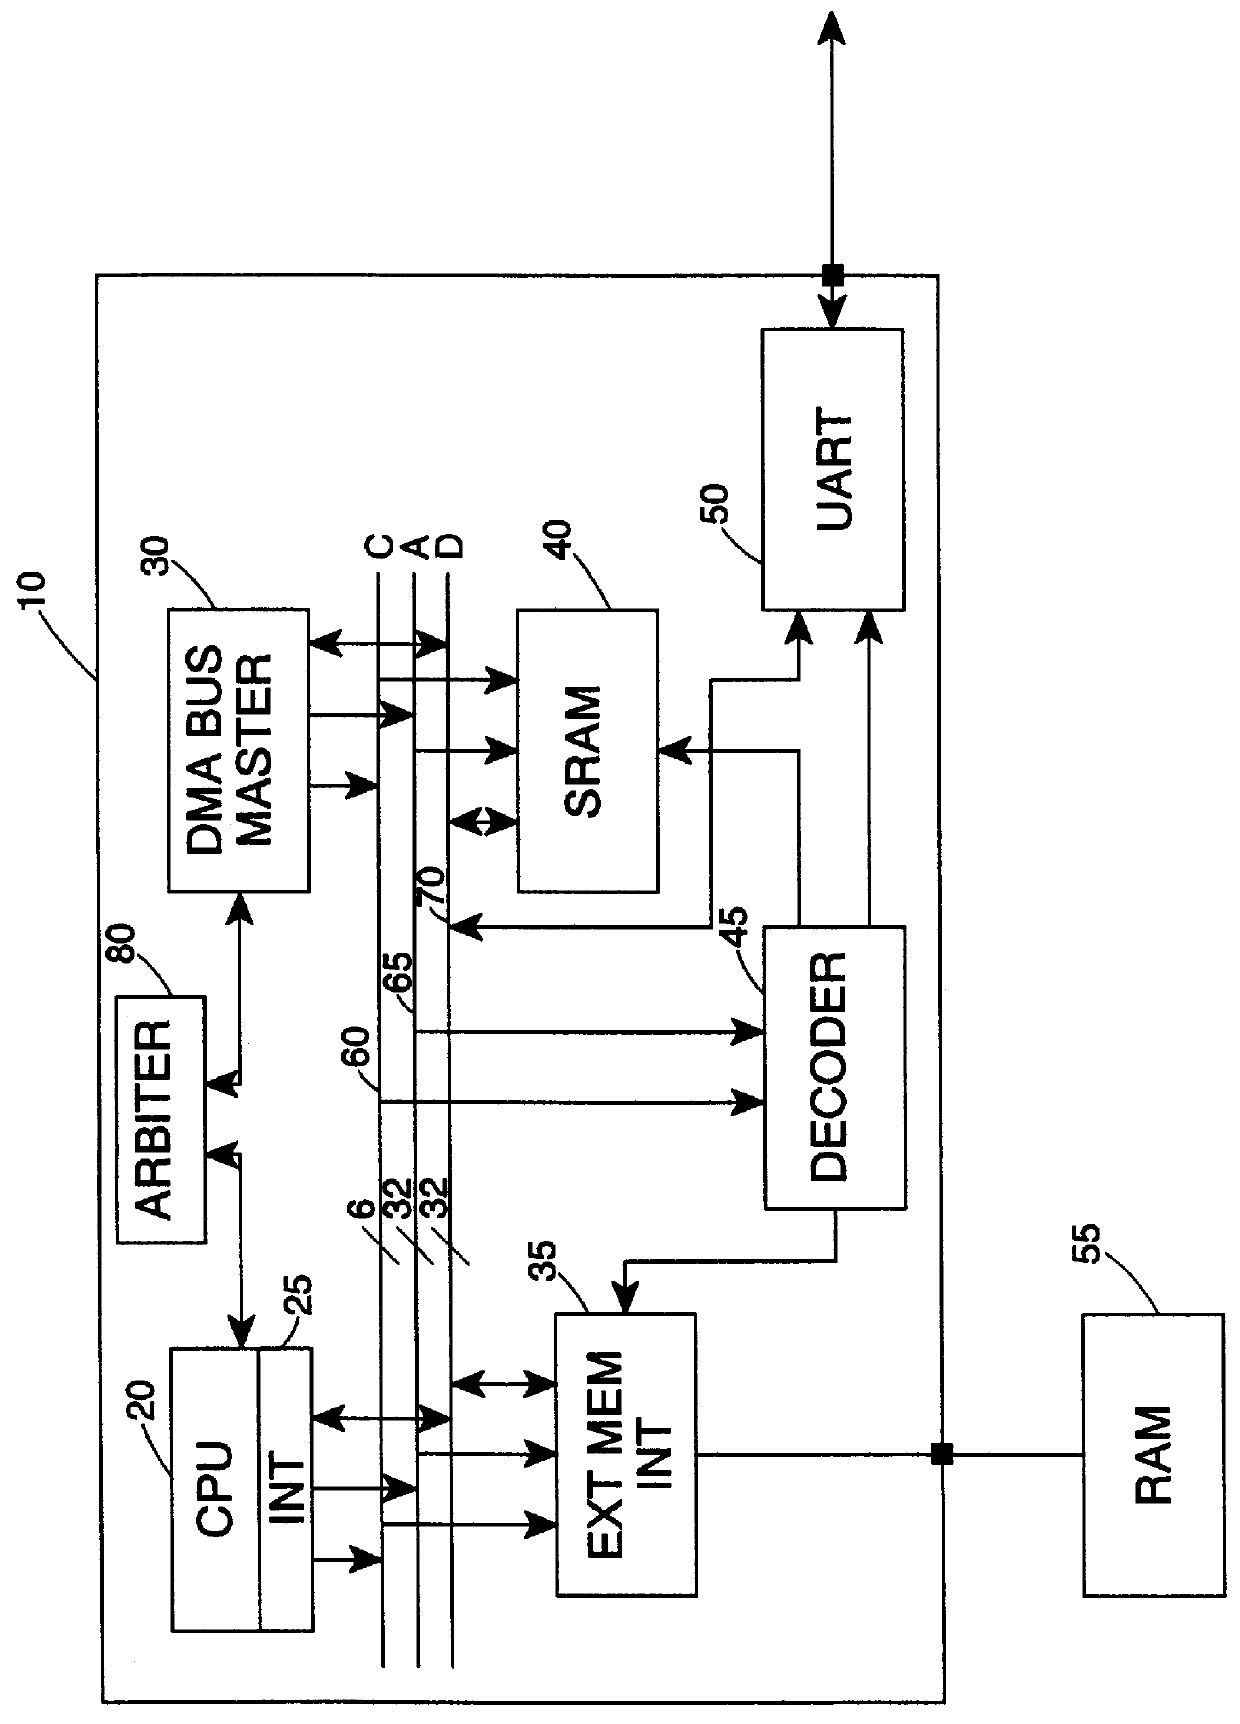 Macrocell for data processing circuit